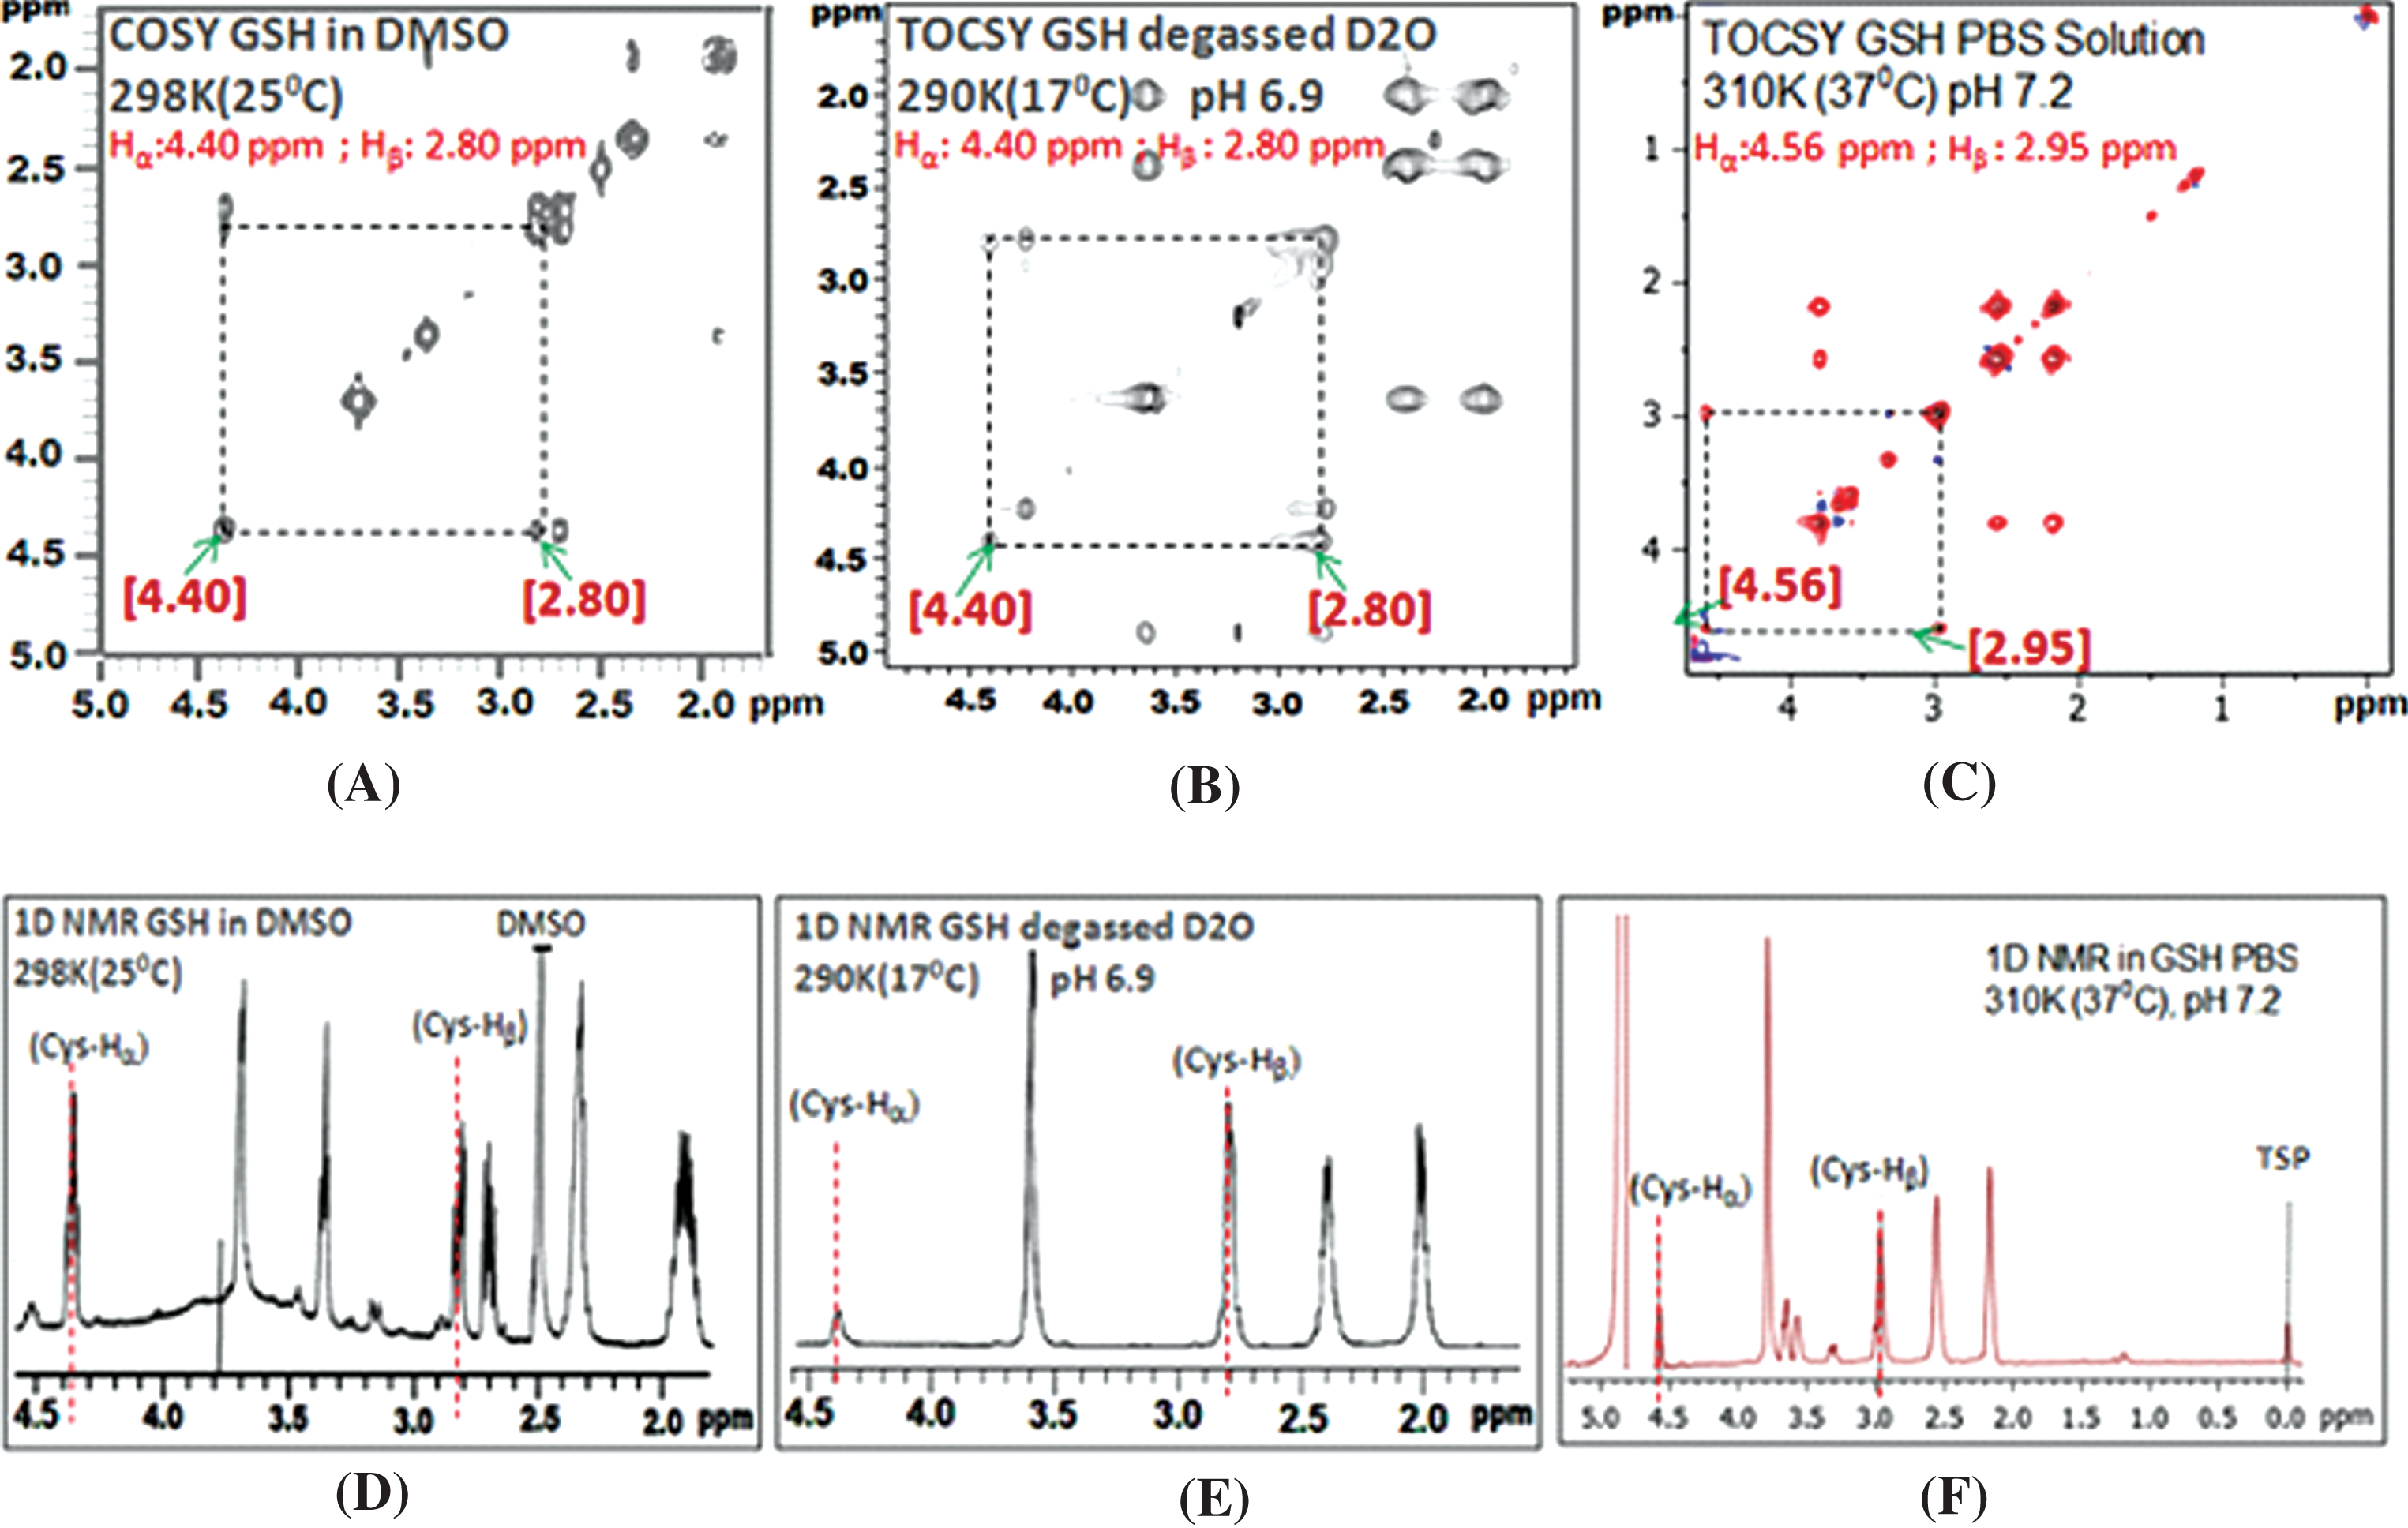 In vitro GSH sample study using NMR under different sample conditions. 2D NMR showing J-coupled GSH Cysteine peaks under different sample conditions: (A) COSY spectra of GSH in DMSO [18], (B) TOCSY spectra of GSH in aqueous D2O (degassed with nitrogen) [19], (C) TOCSY spectra of GSH in phosphate buffer saline (PBS) solutions; 1D NMR sample study for GSH in (D) DMSO [18], (E) aqueous D2O (degassed) [19], (F) PBS solutions (no degassing) (copyright permission obtained from the respective publishers).